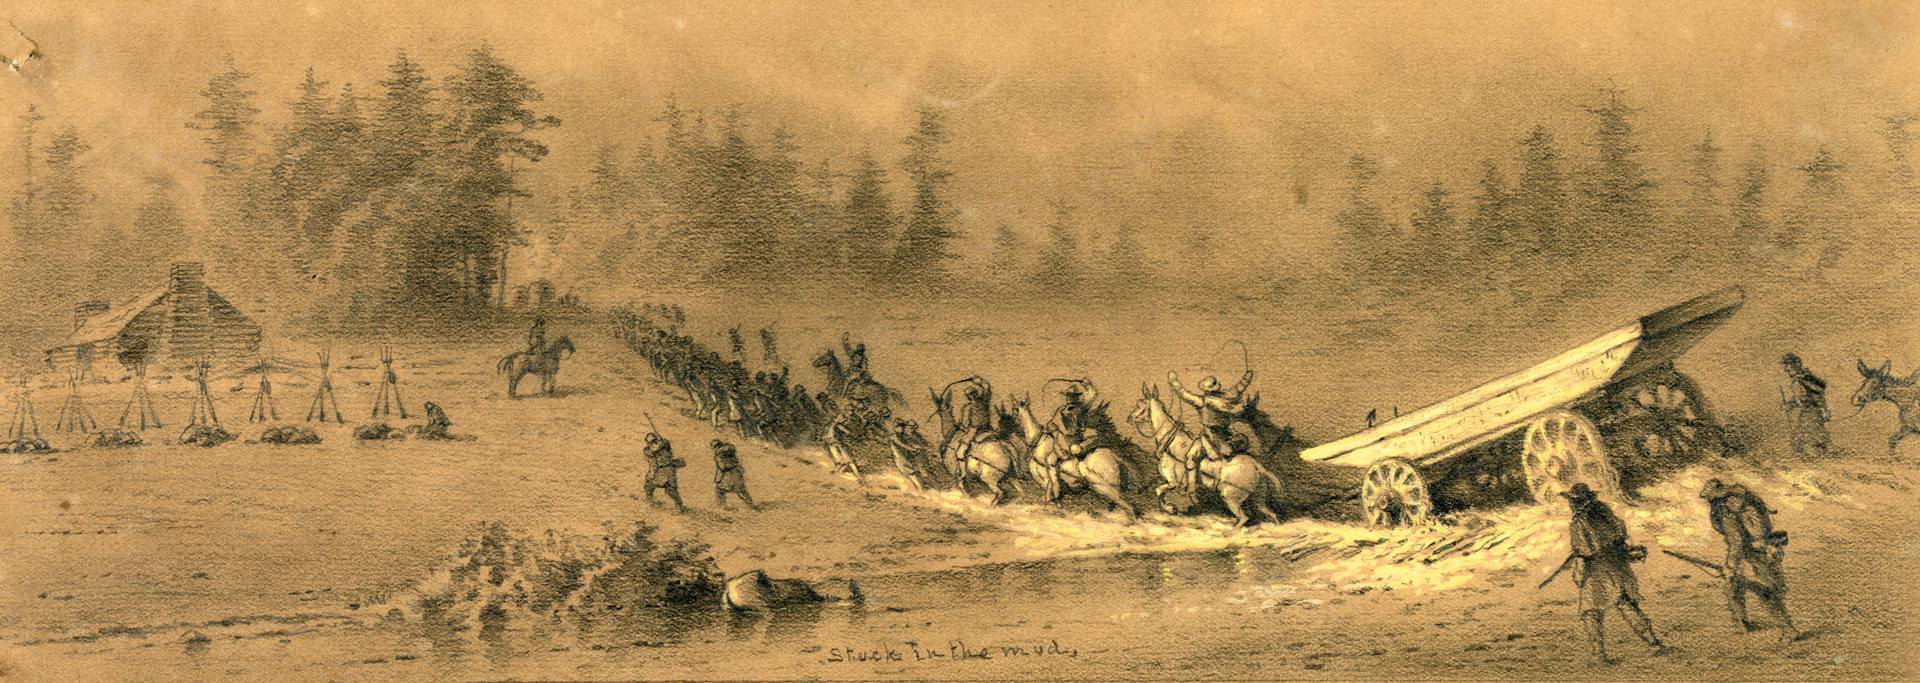 A Union column tramps through the rain during Maj. Gen. Ambrose Burnside’s January 1863 Mud March. Burnside’s replacement, Maj. Gen. Joseph Hooker, improved intelligence operations significantly when he took command.